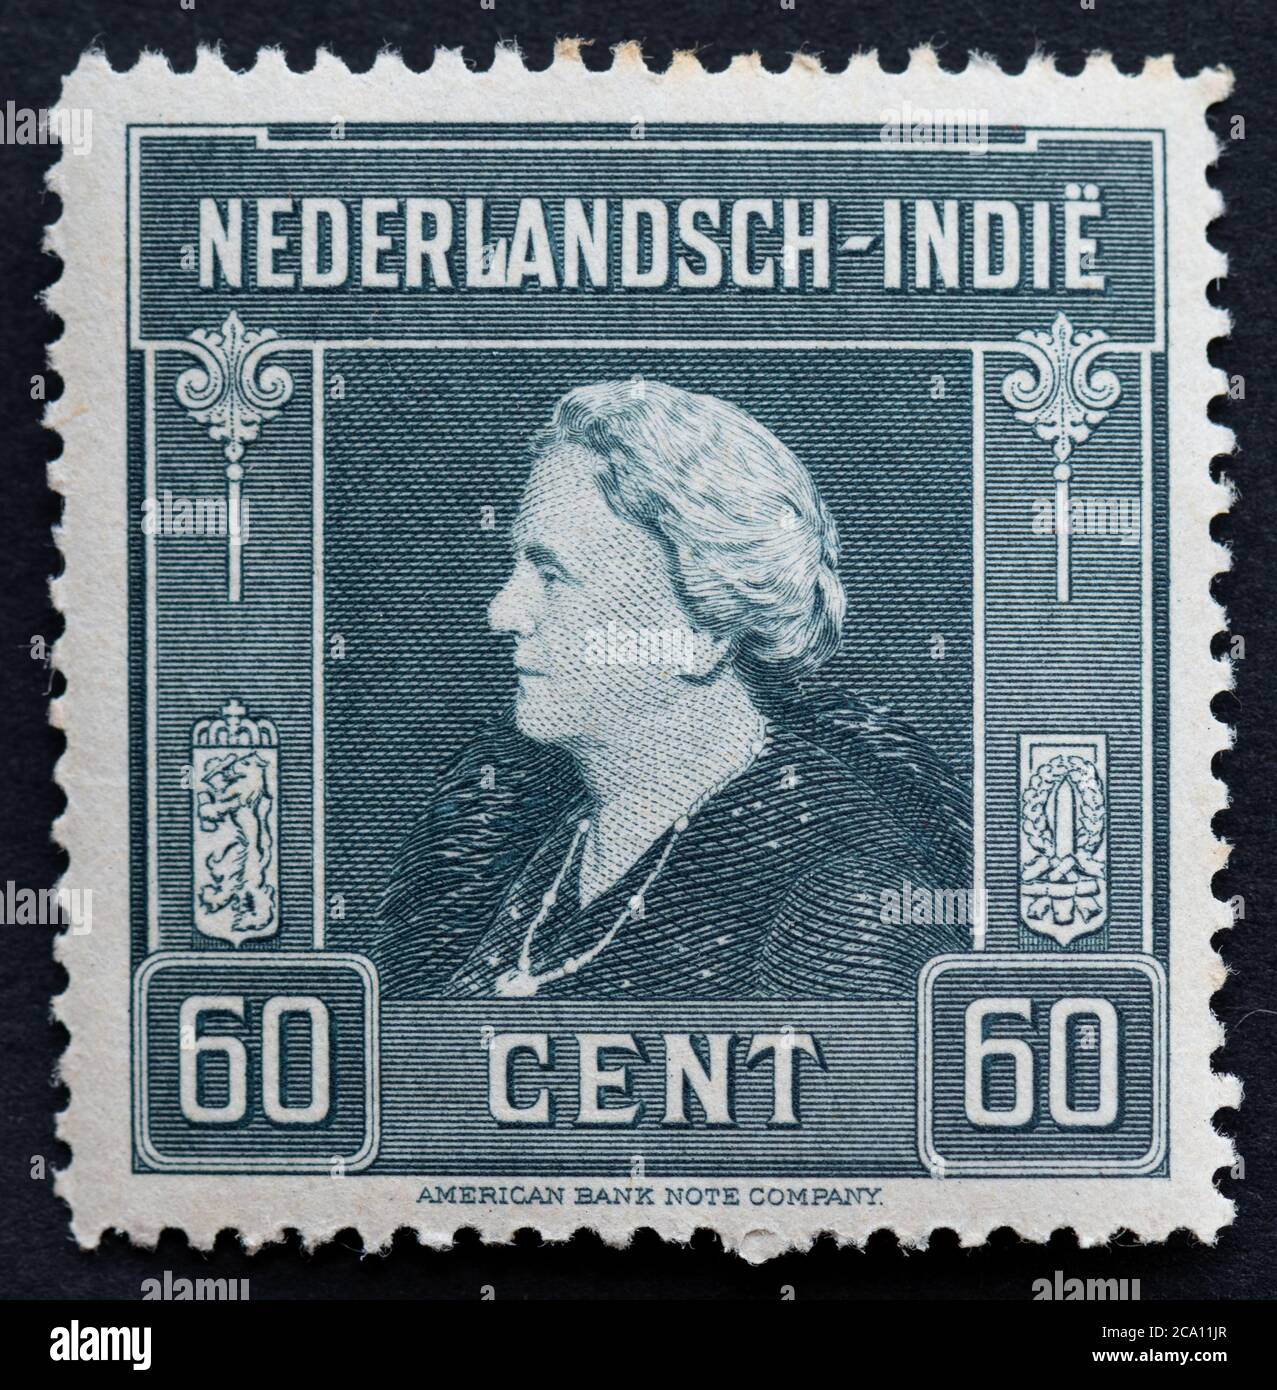 Queen Wilhelmina of the Netherlands on Dutch East Indies 60 cent postage stamp 1945 published by American Bank Note Company Stock Photo